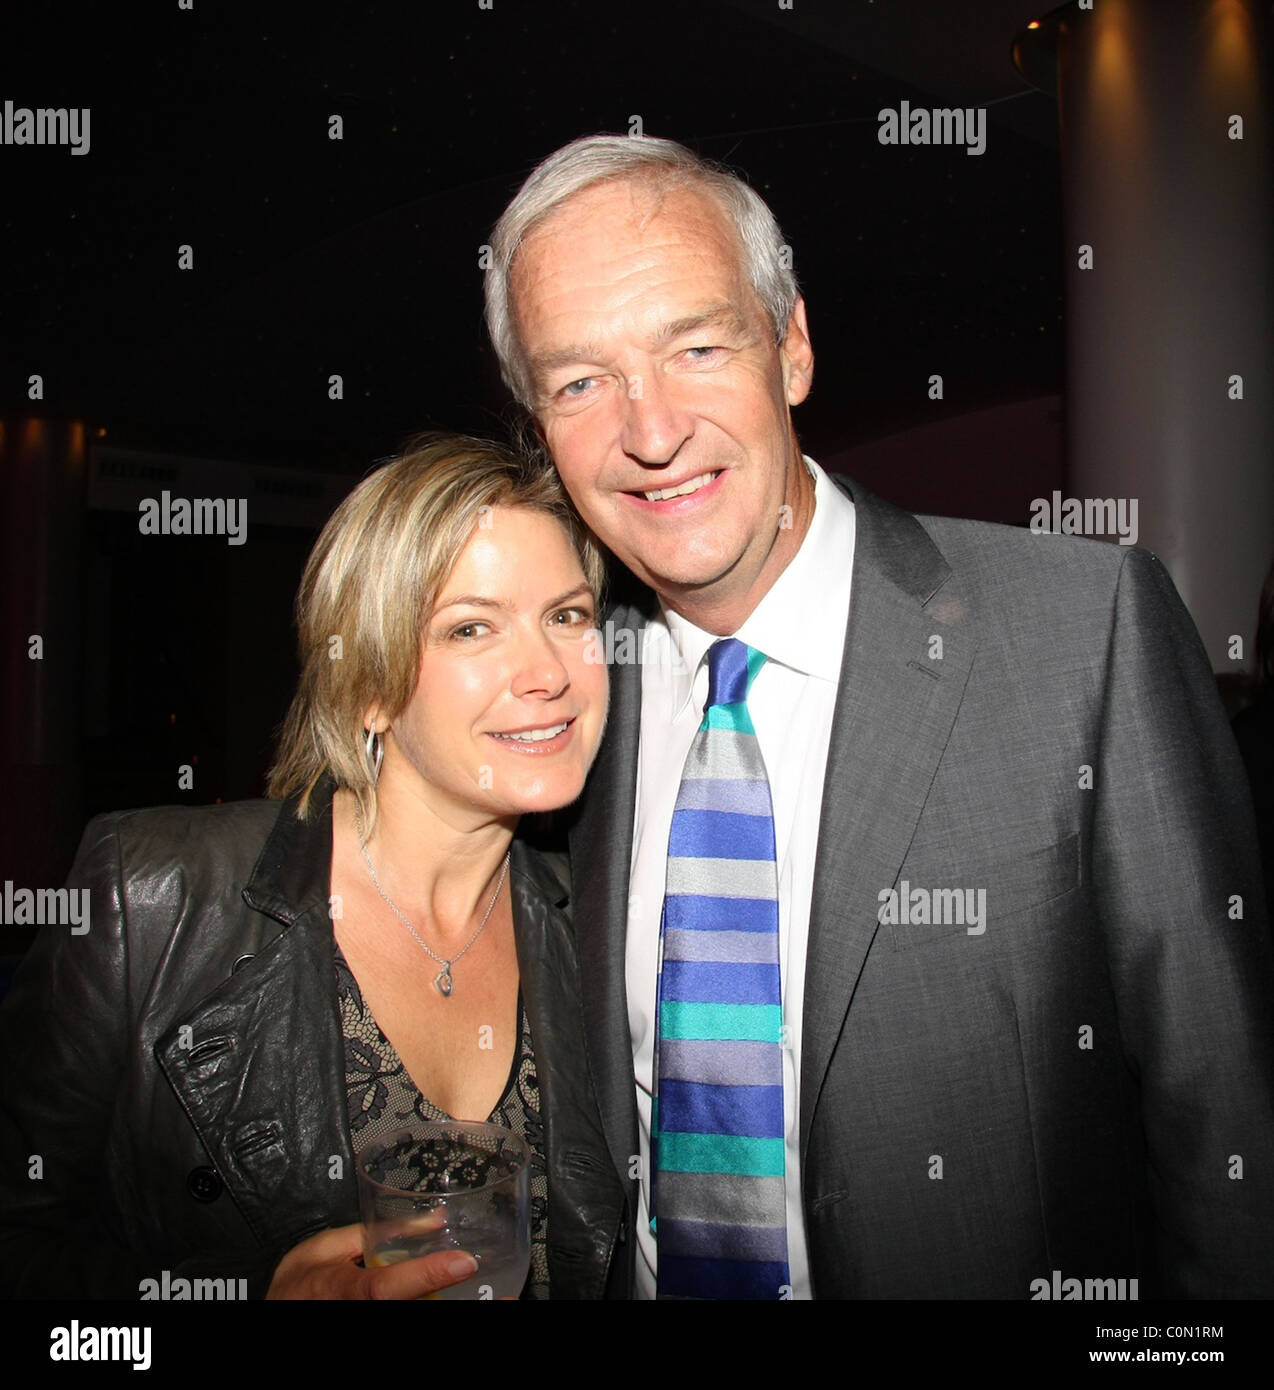 Penny Smith and Jon Snow attend the Kathy Lette Book Launch 'To Love Honour and Betray' held at the Haymarket Hotel. London, Stock Photo